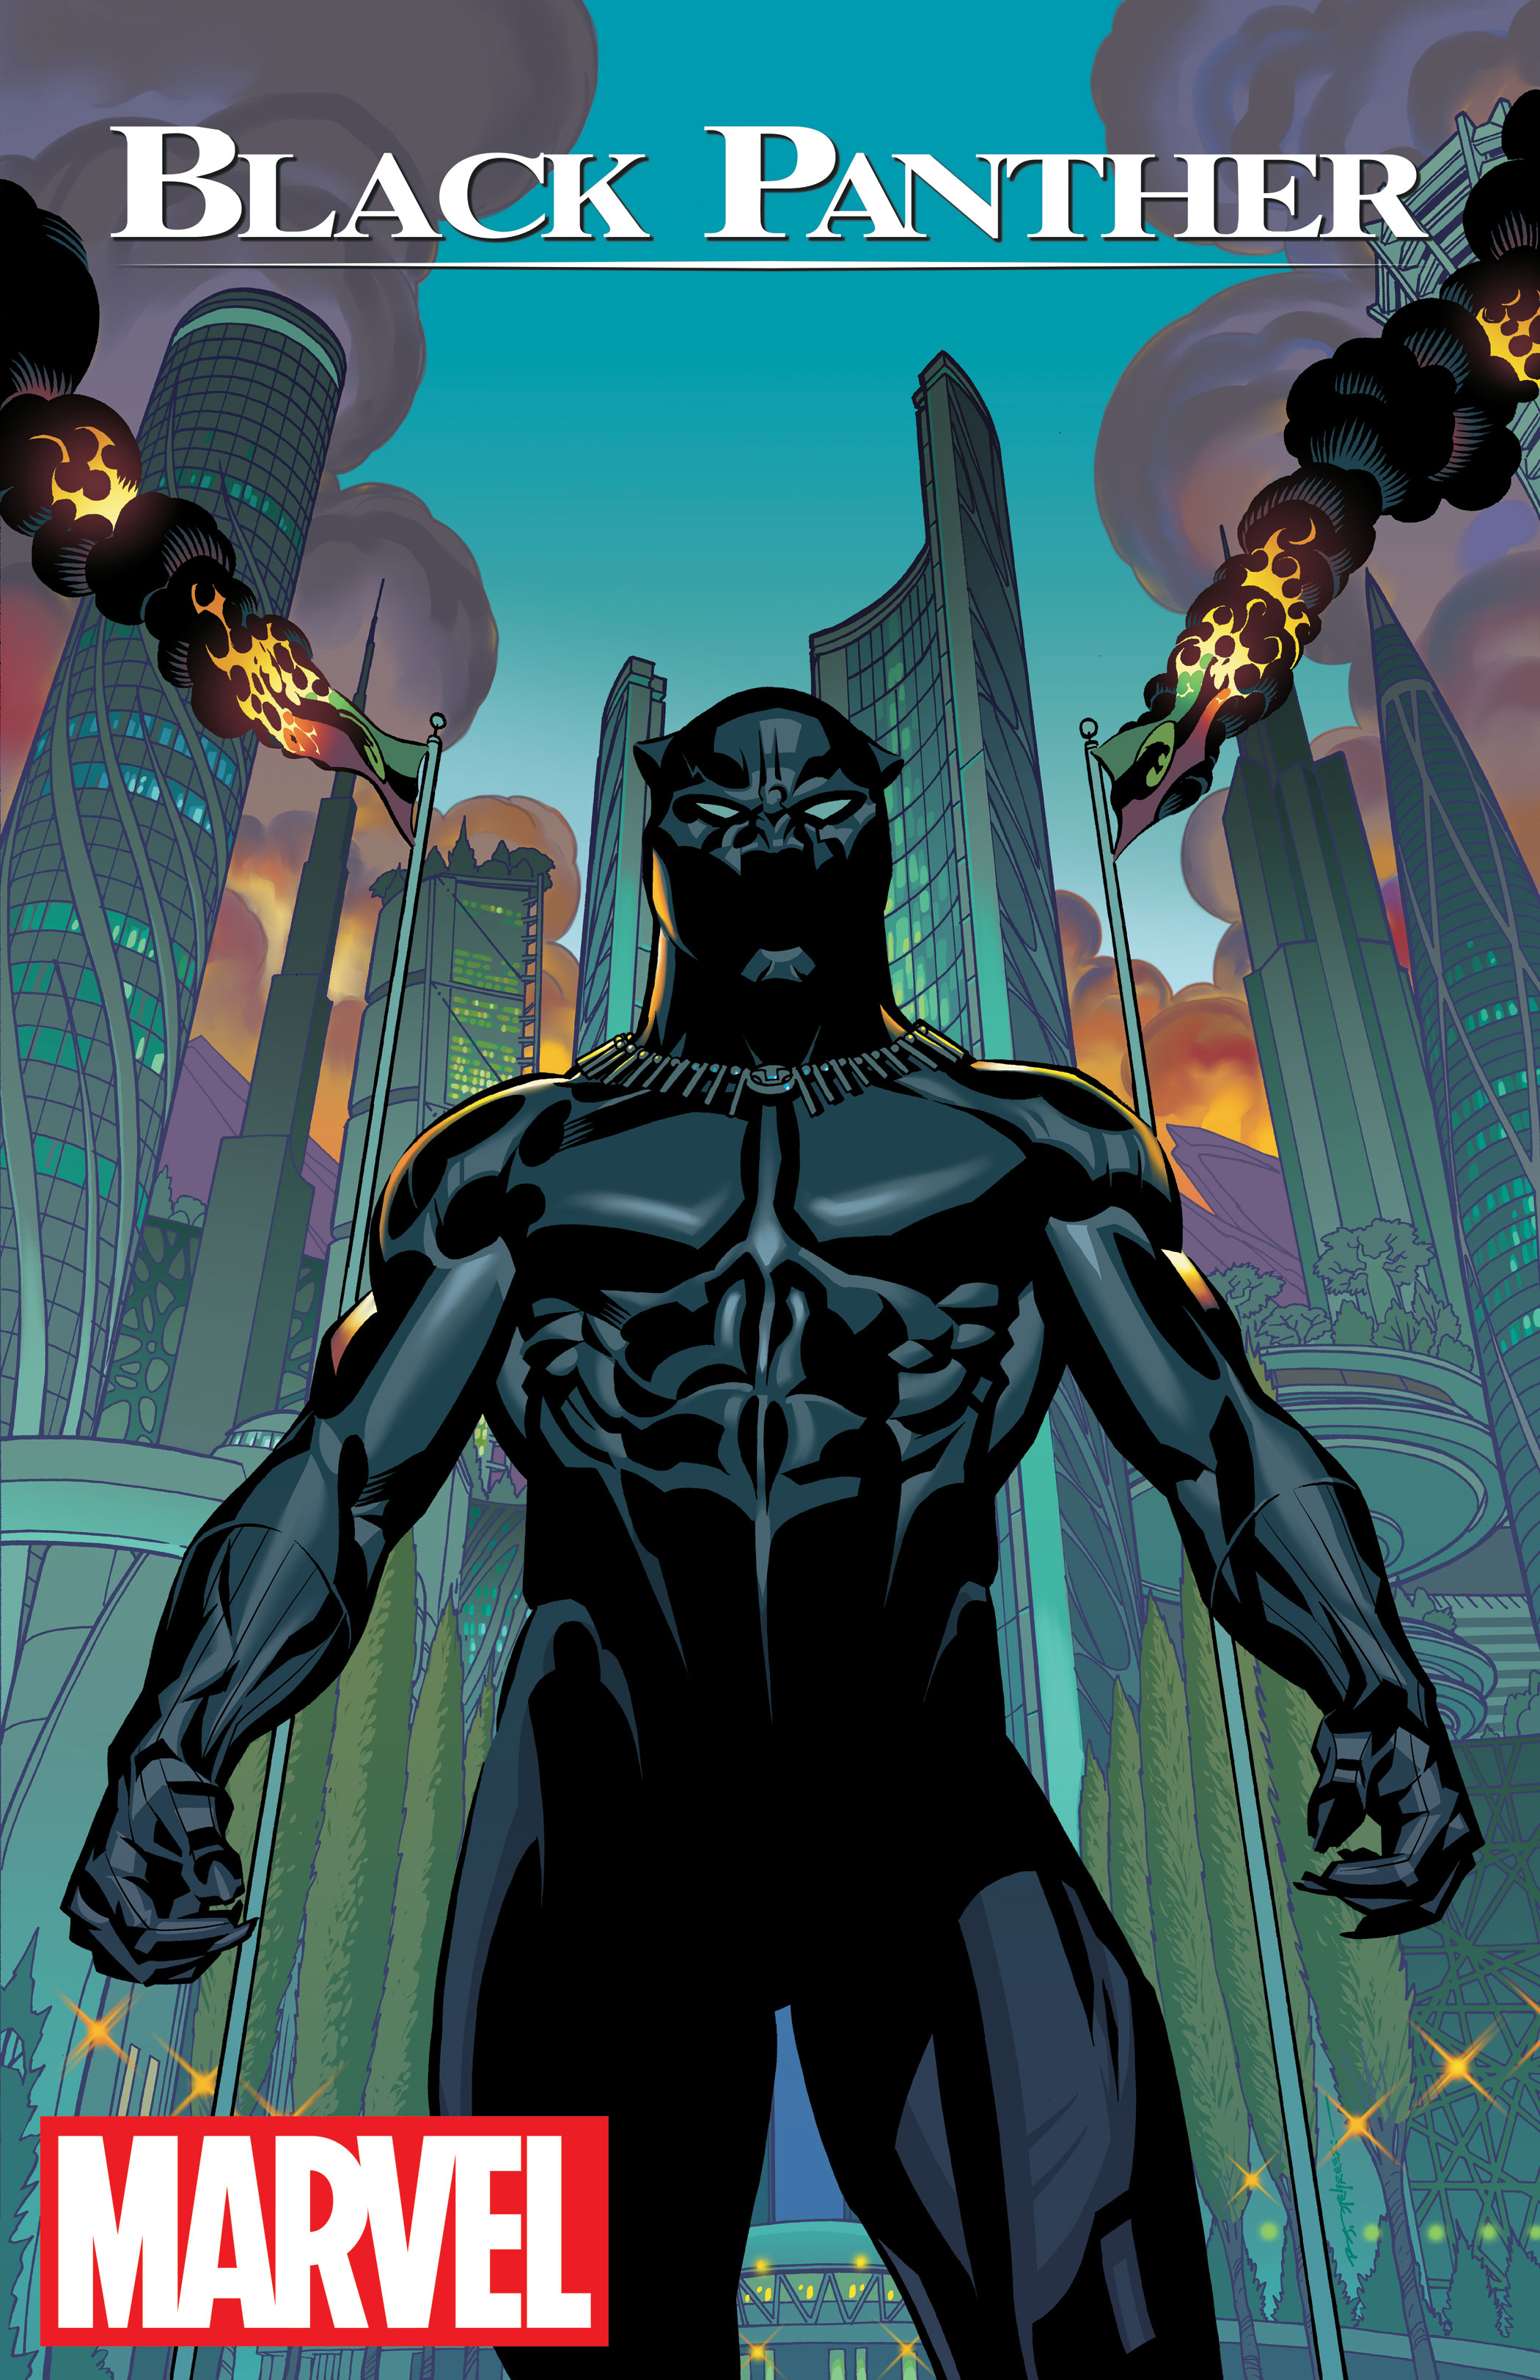 Black Panther No. 1 Cover drawn by Brian Stelfreeze (Marvel Comics)